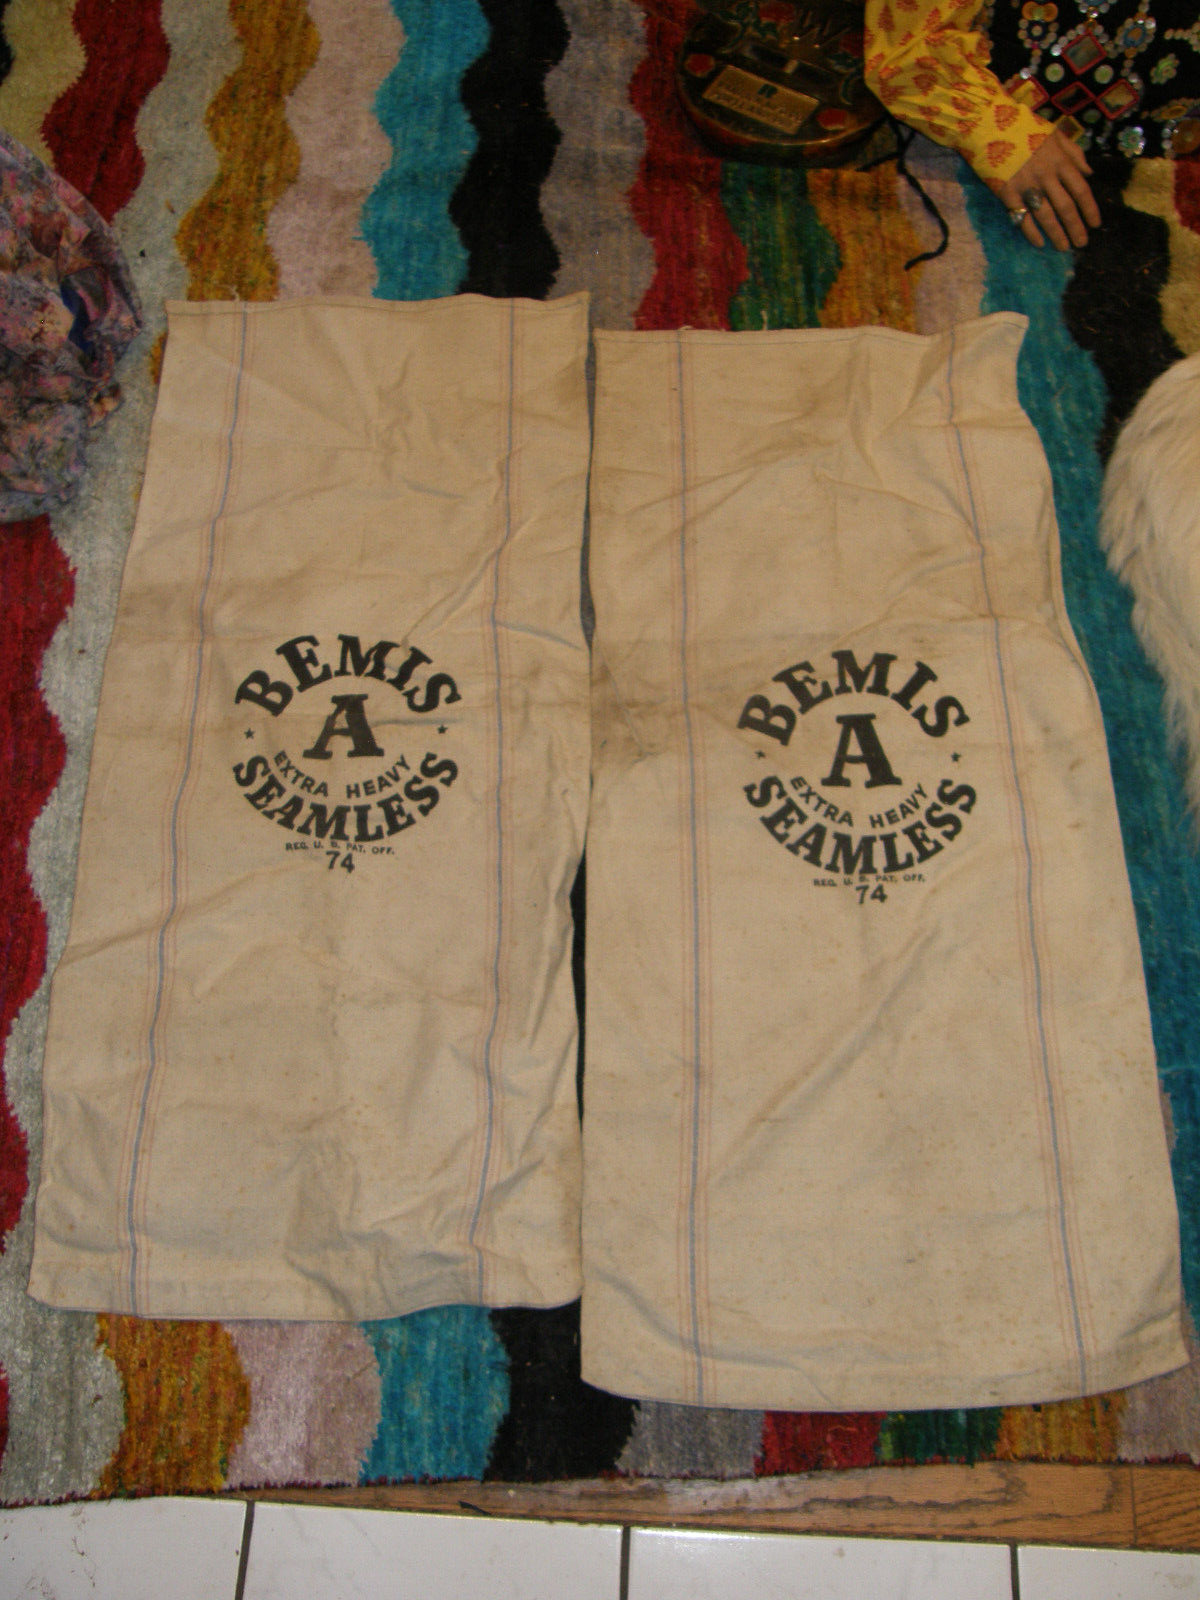 Two Bemis A Extra Heavy Seamless Feed Sack nice bright logos no holes or patches